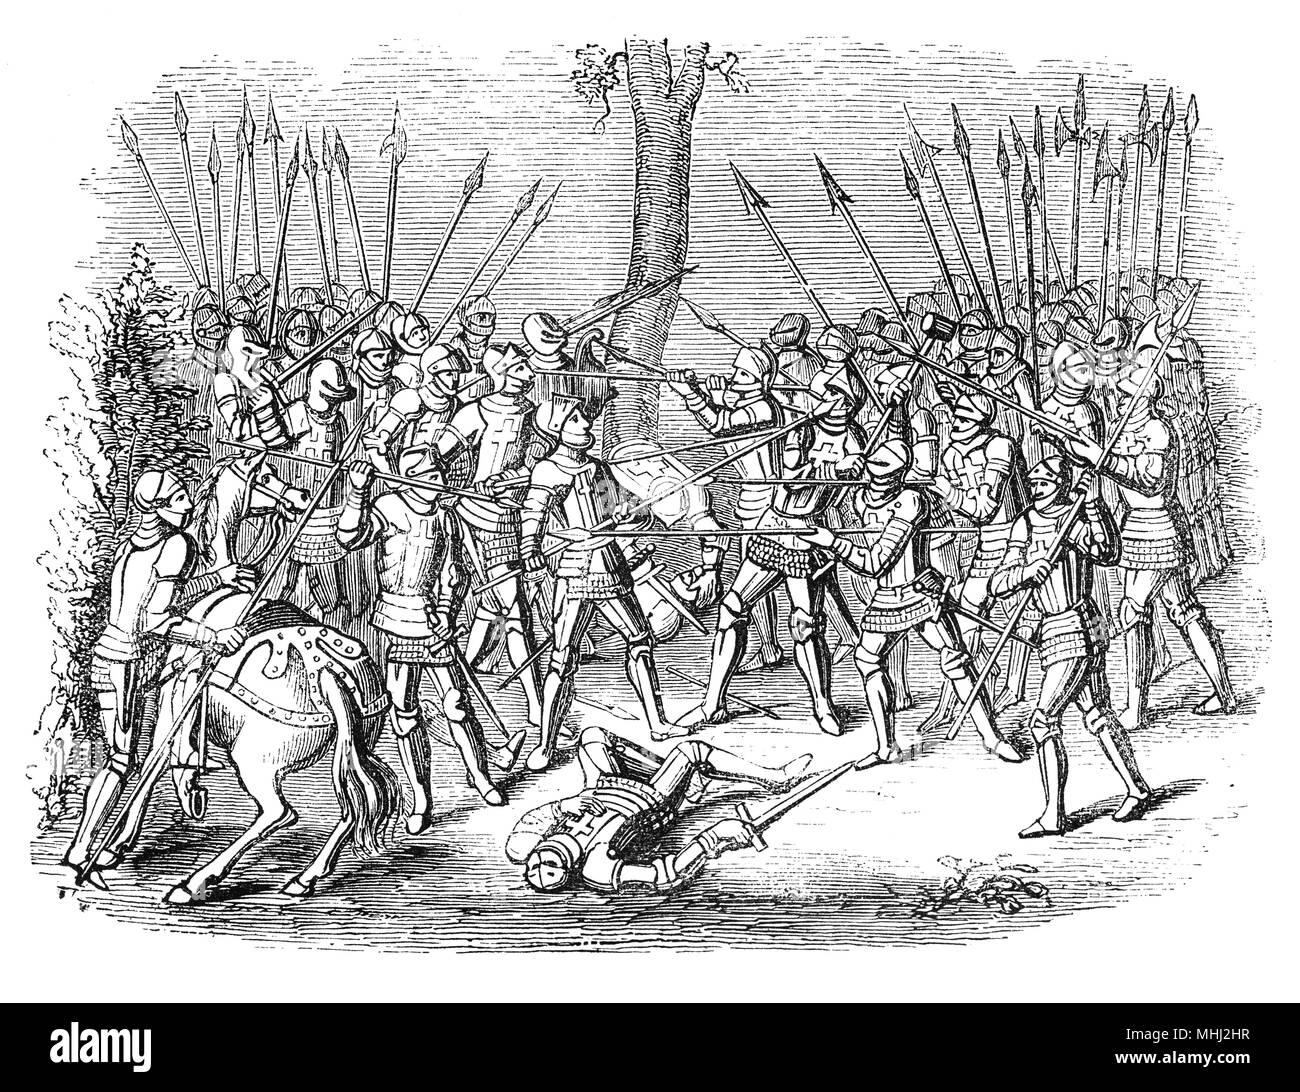 The Melee was a type of mock combat in medieval tournaments with the aim of smashing into the enemy in massed formation, with the aim of throwing them back or breaking their ranks.  The tournament had a resurgence of popularity in England in the first half of the 14th Century, however it  died out during the reign of Edward III who encouraged the move towards pageantry and a predominance of jousting in his sponsored events. In the last true tournament held in England in 1342 at Dunstable, the mêlée was postponed so long by jousting that the sun was sinking by the time the lines charged. Stock Photo